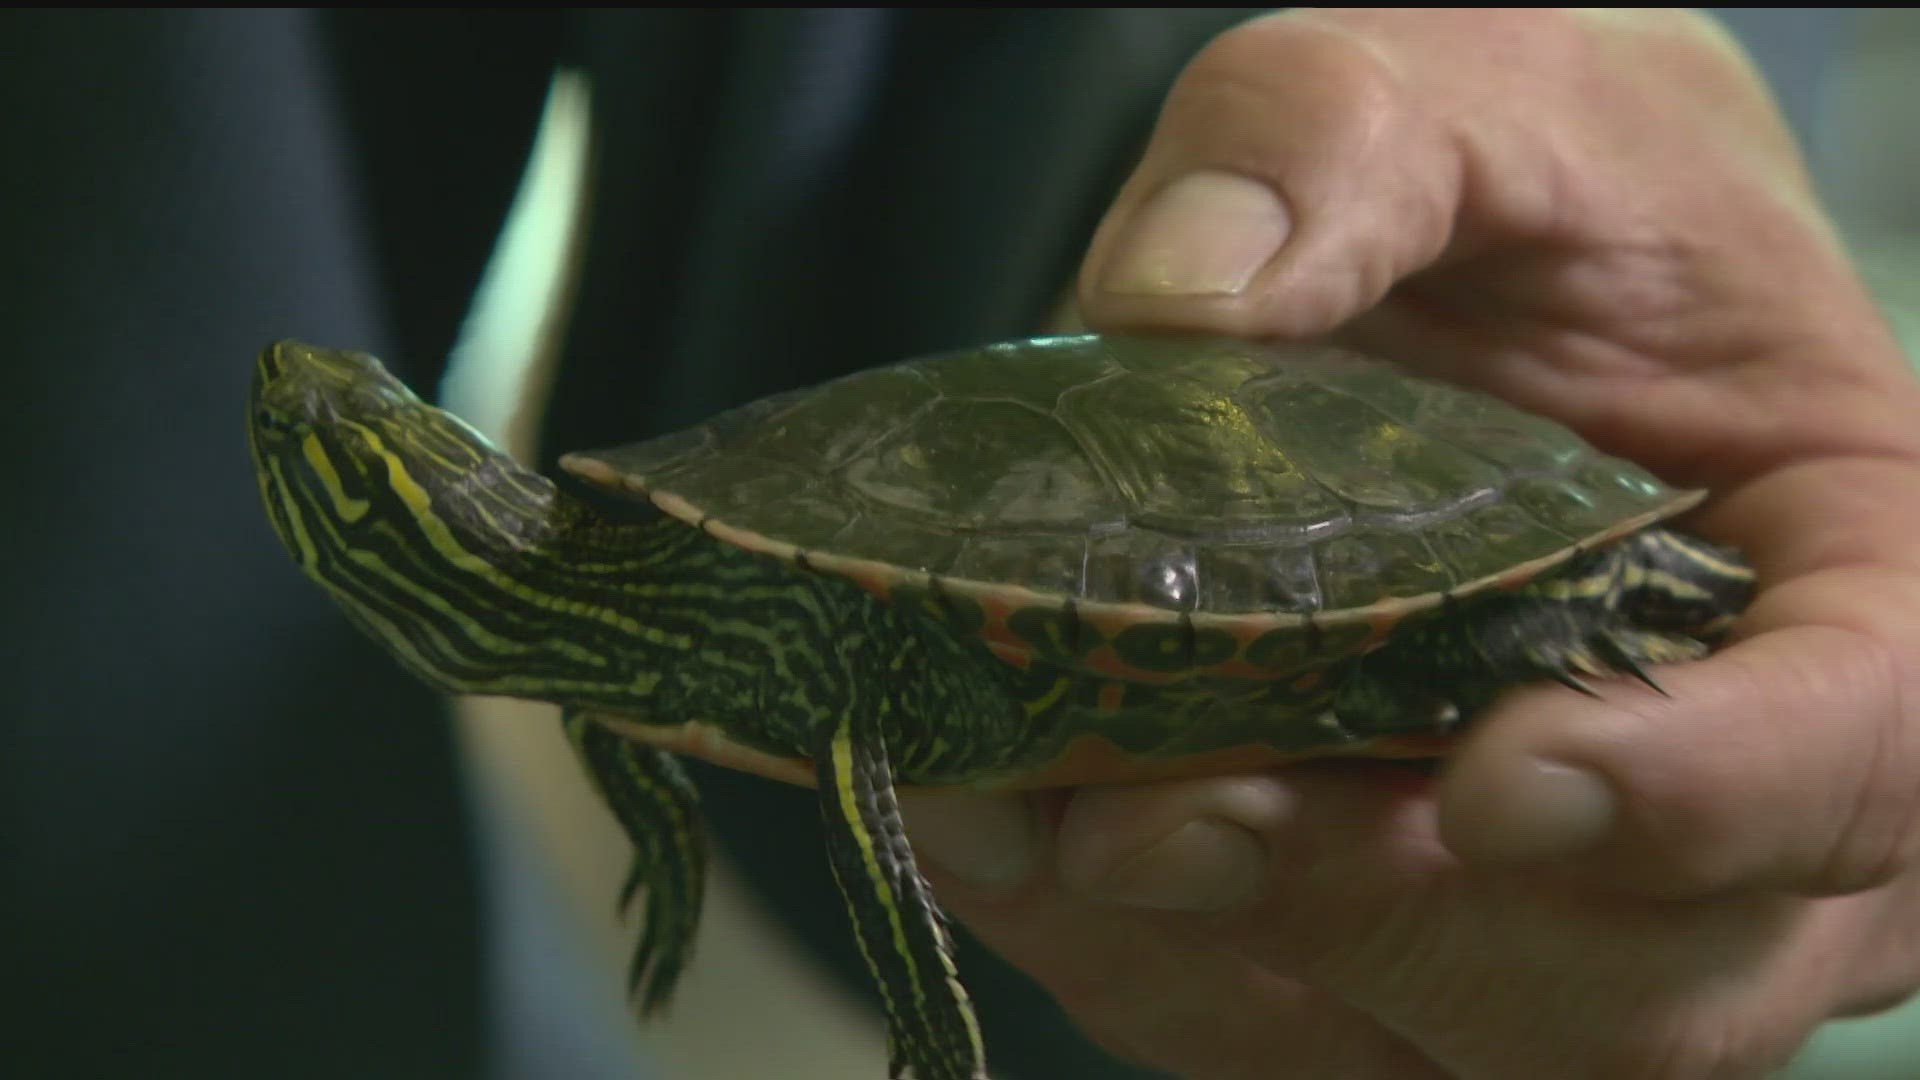 Representative Samantha Vang carried the bill to ban commercial trapping, which claimed thousands of wild painted turtles and snappers every year.